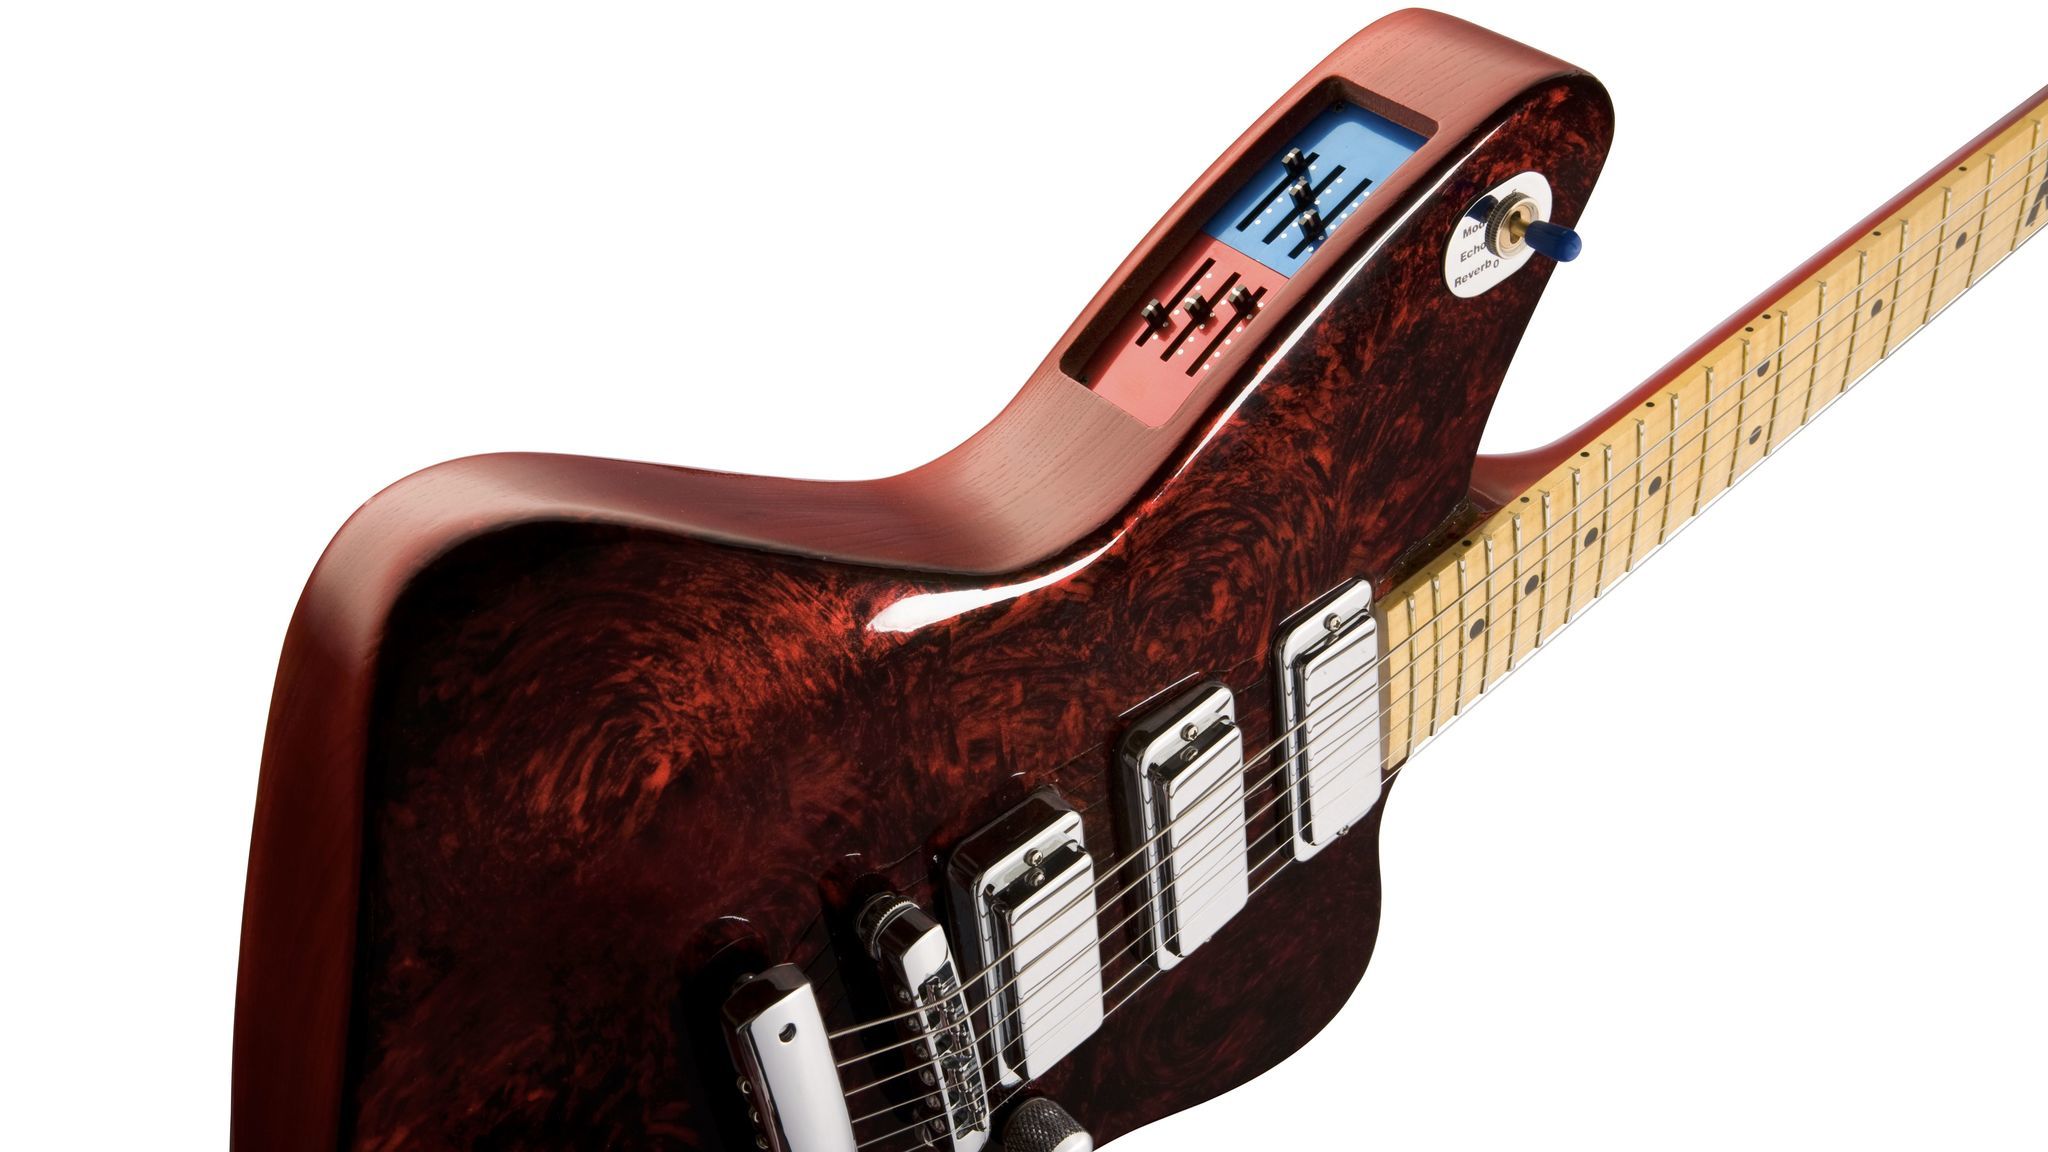 Gibson’s Firebird X “hexaphonic” limited-edition electric instrument.